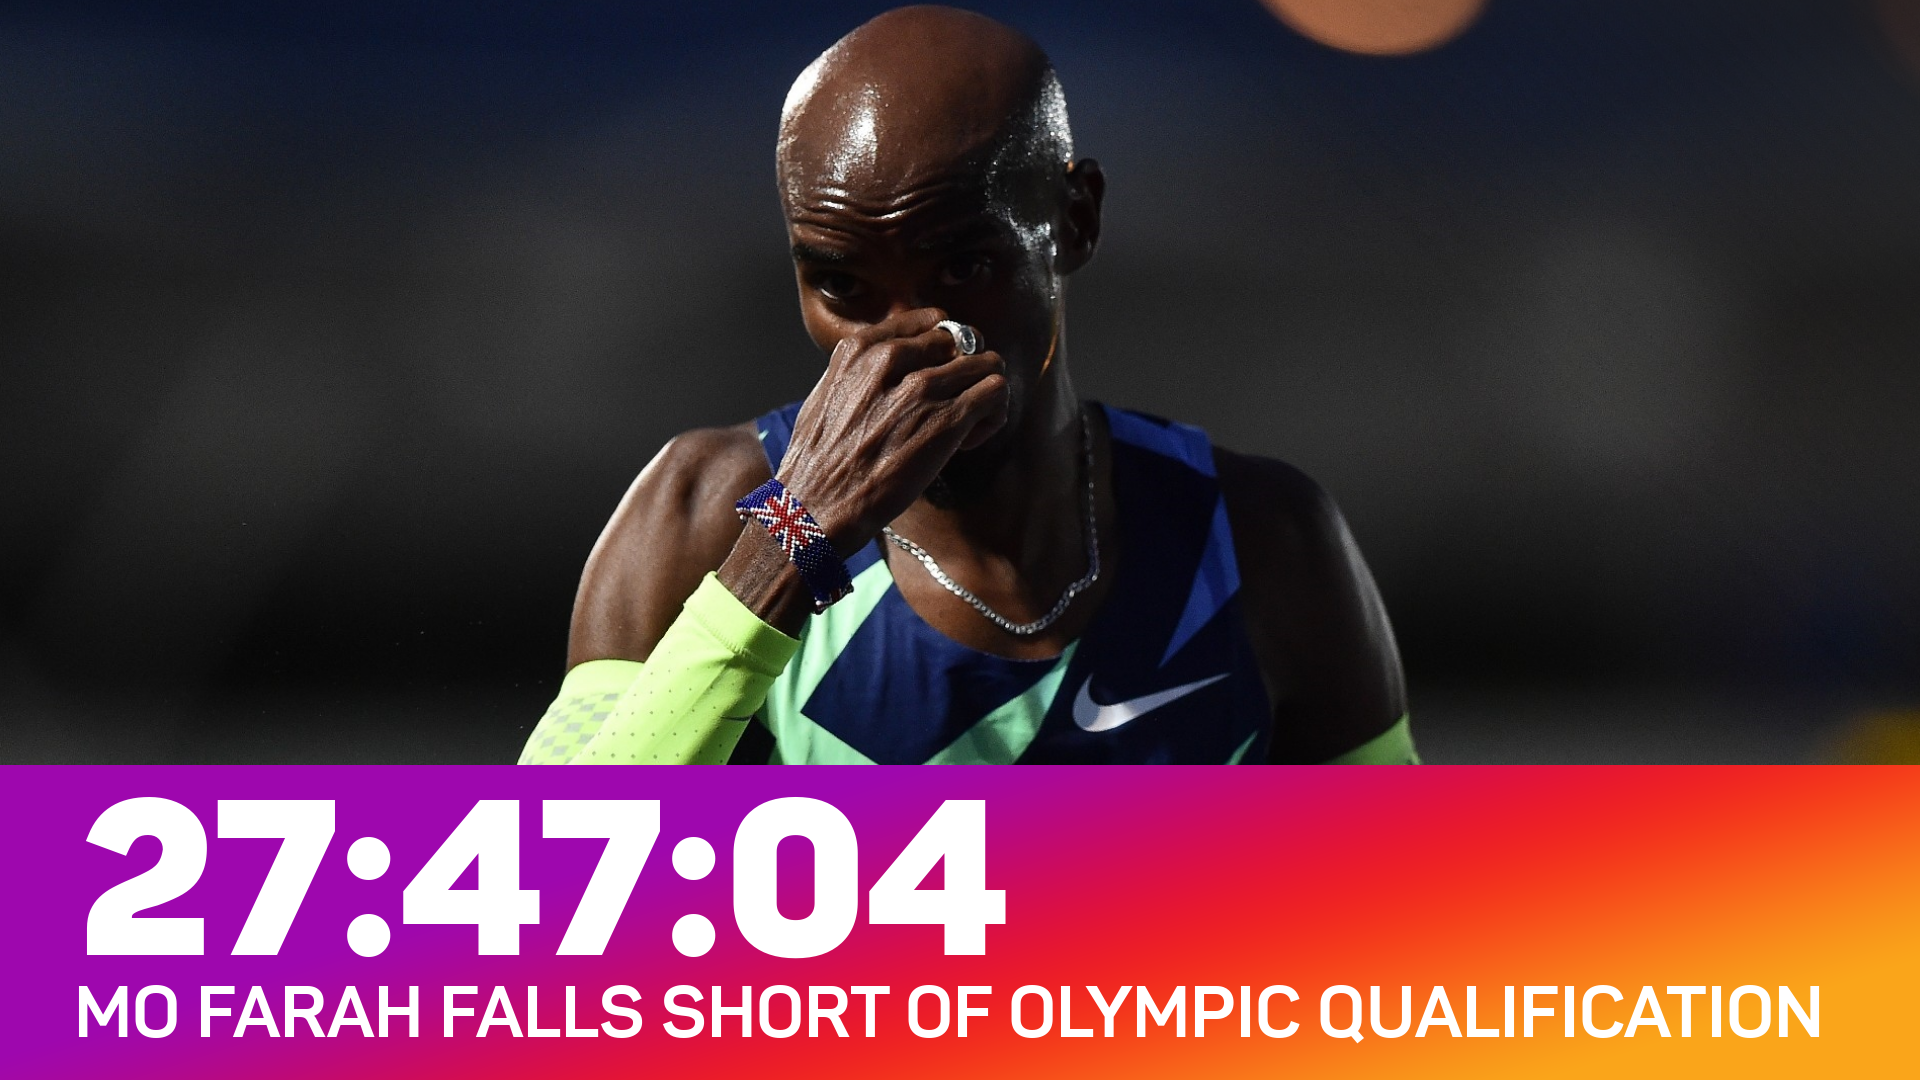 Mo Farah's efforts were not enough in Manchester